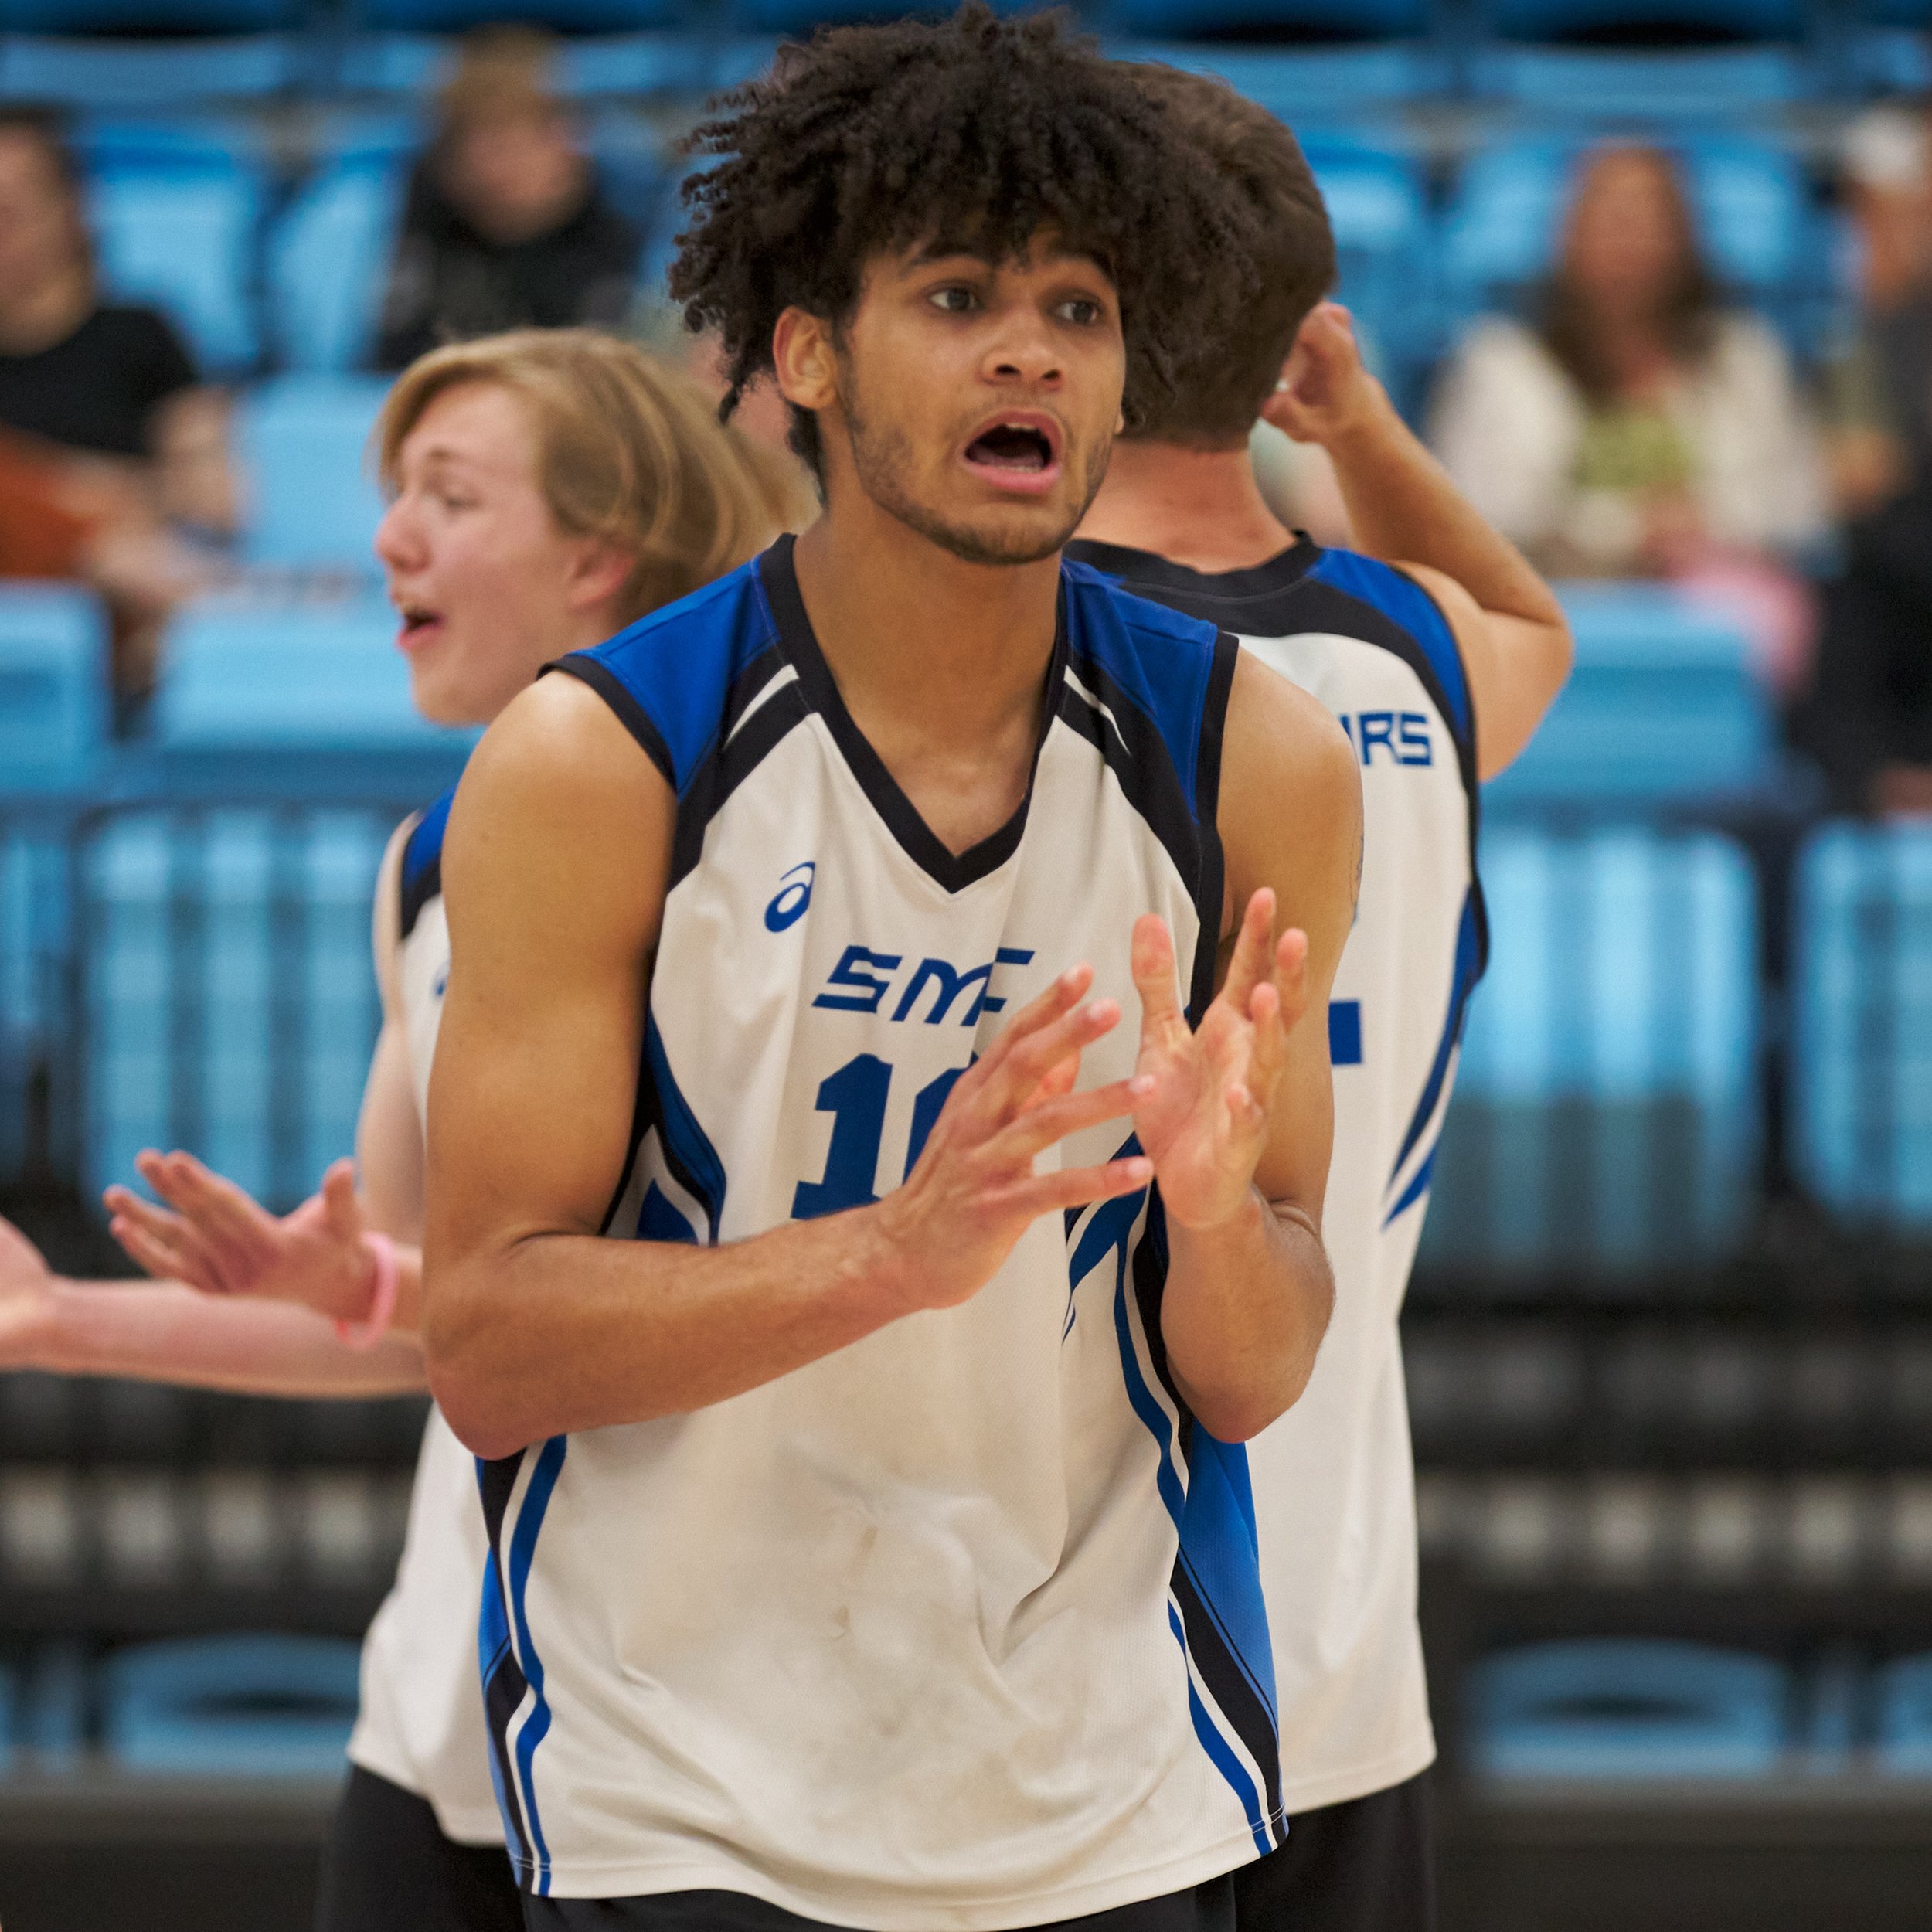  Santa Monica College Corsairs' Nate Davis during the men's volleyball match against the Moorpark College Raiders on Friday, March 17, 2023, at Moorpark College's Gymnasium in Moorpark, Calif. The Corsairs lost 3-1. (Nicholas McCall | The Corsair) 